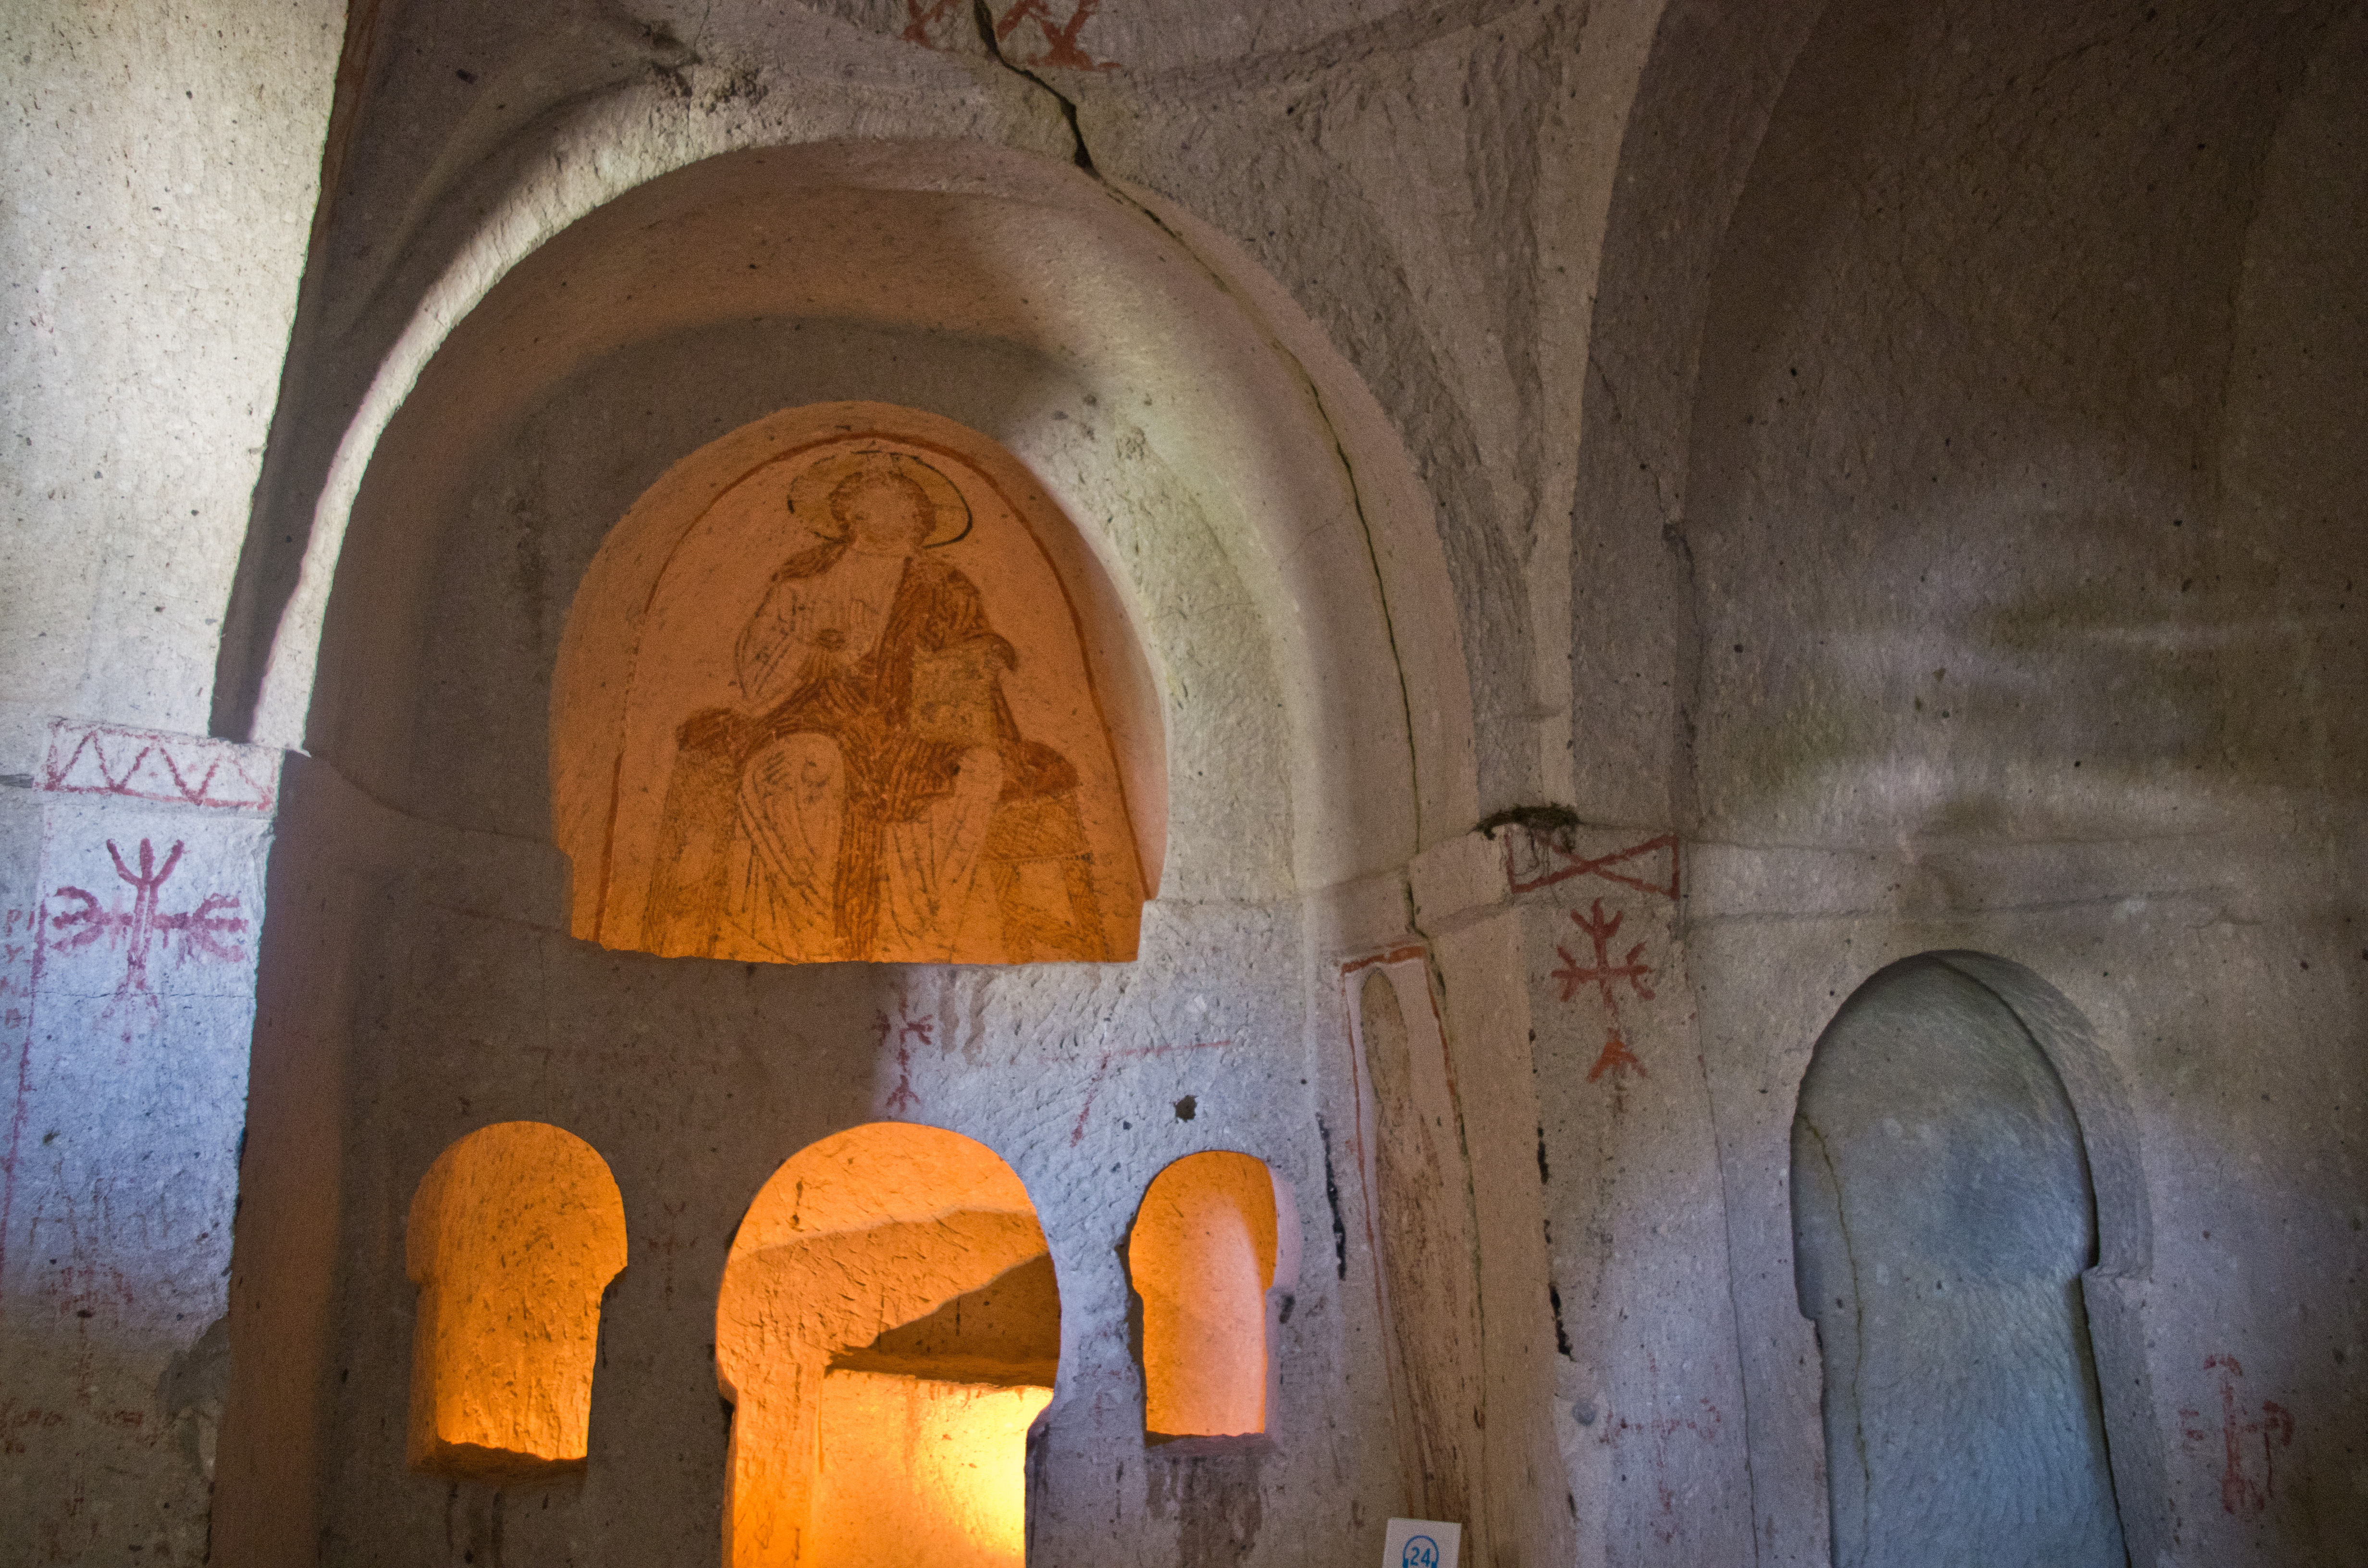 A Churche in Göreme By Antoine Taveneaux - Own work, CC BY-SA 3.0, https://commons.wikimedia.org/w/index.php?curid=16143551